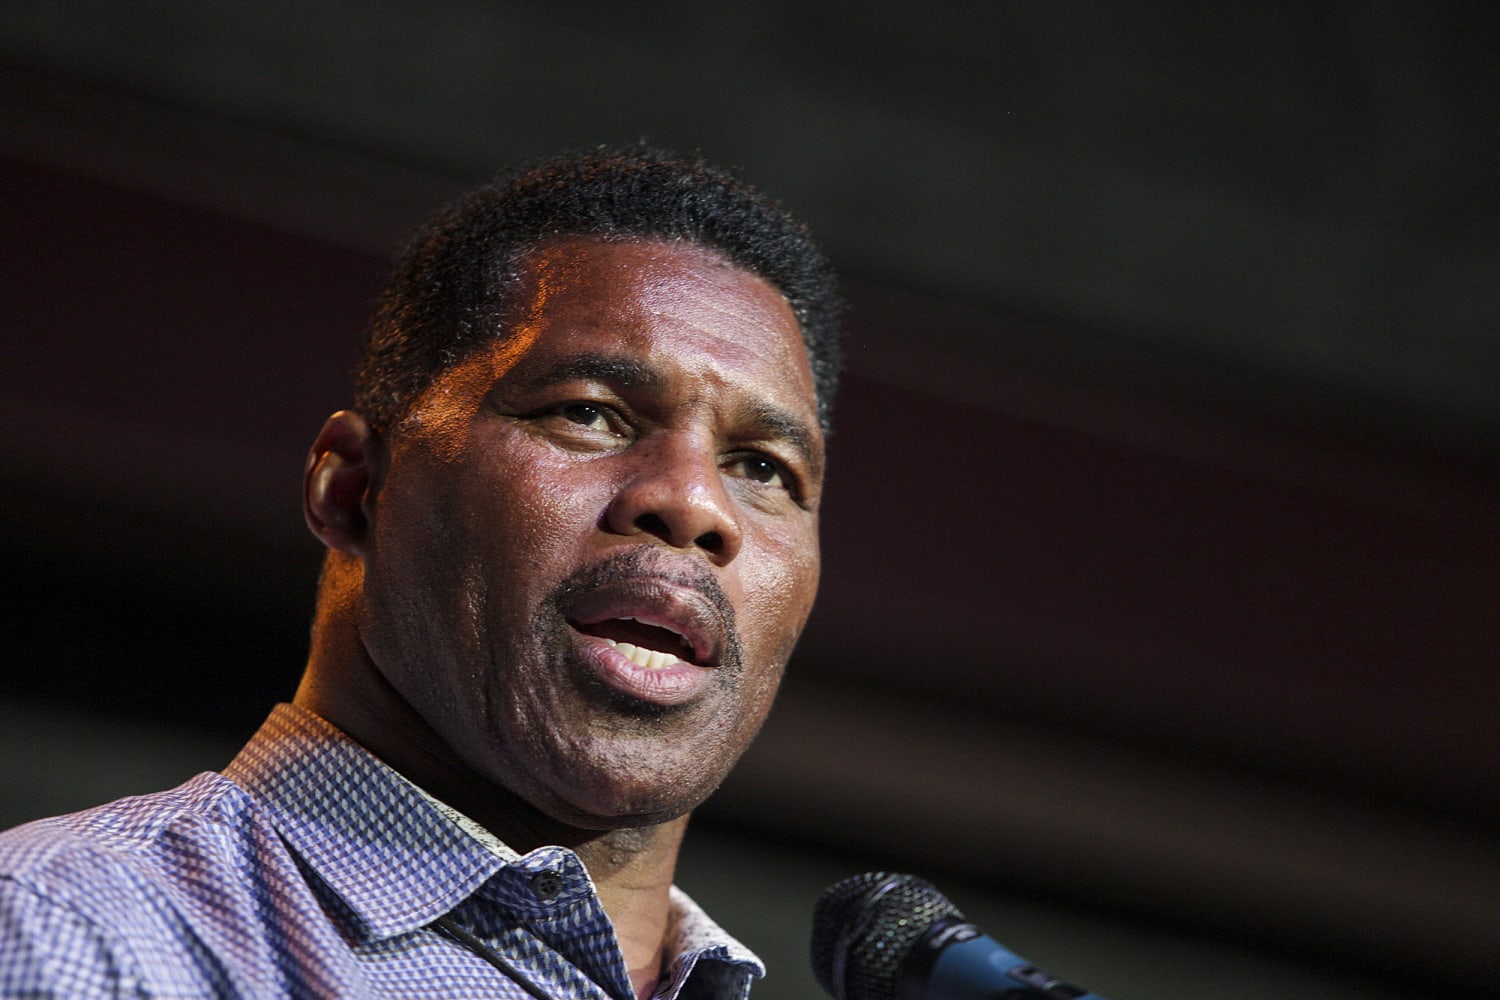 Rebuking new climate law, Herschel Walker asks: ‘Don’t we have enough trees around here?’